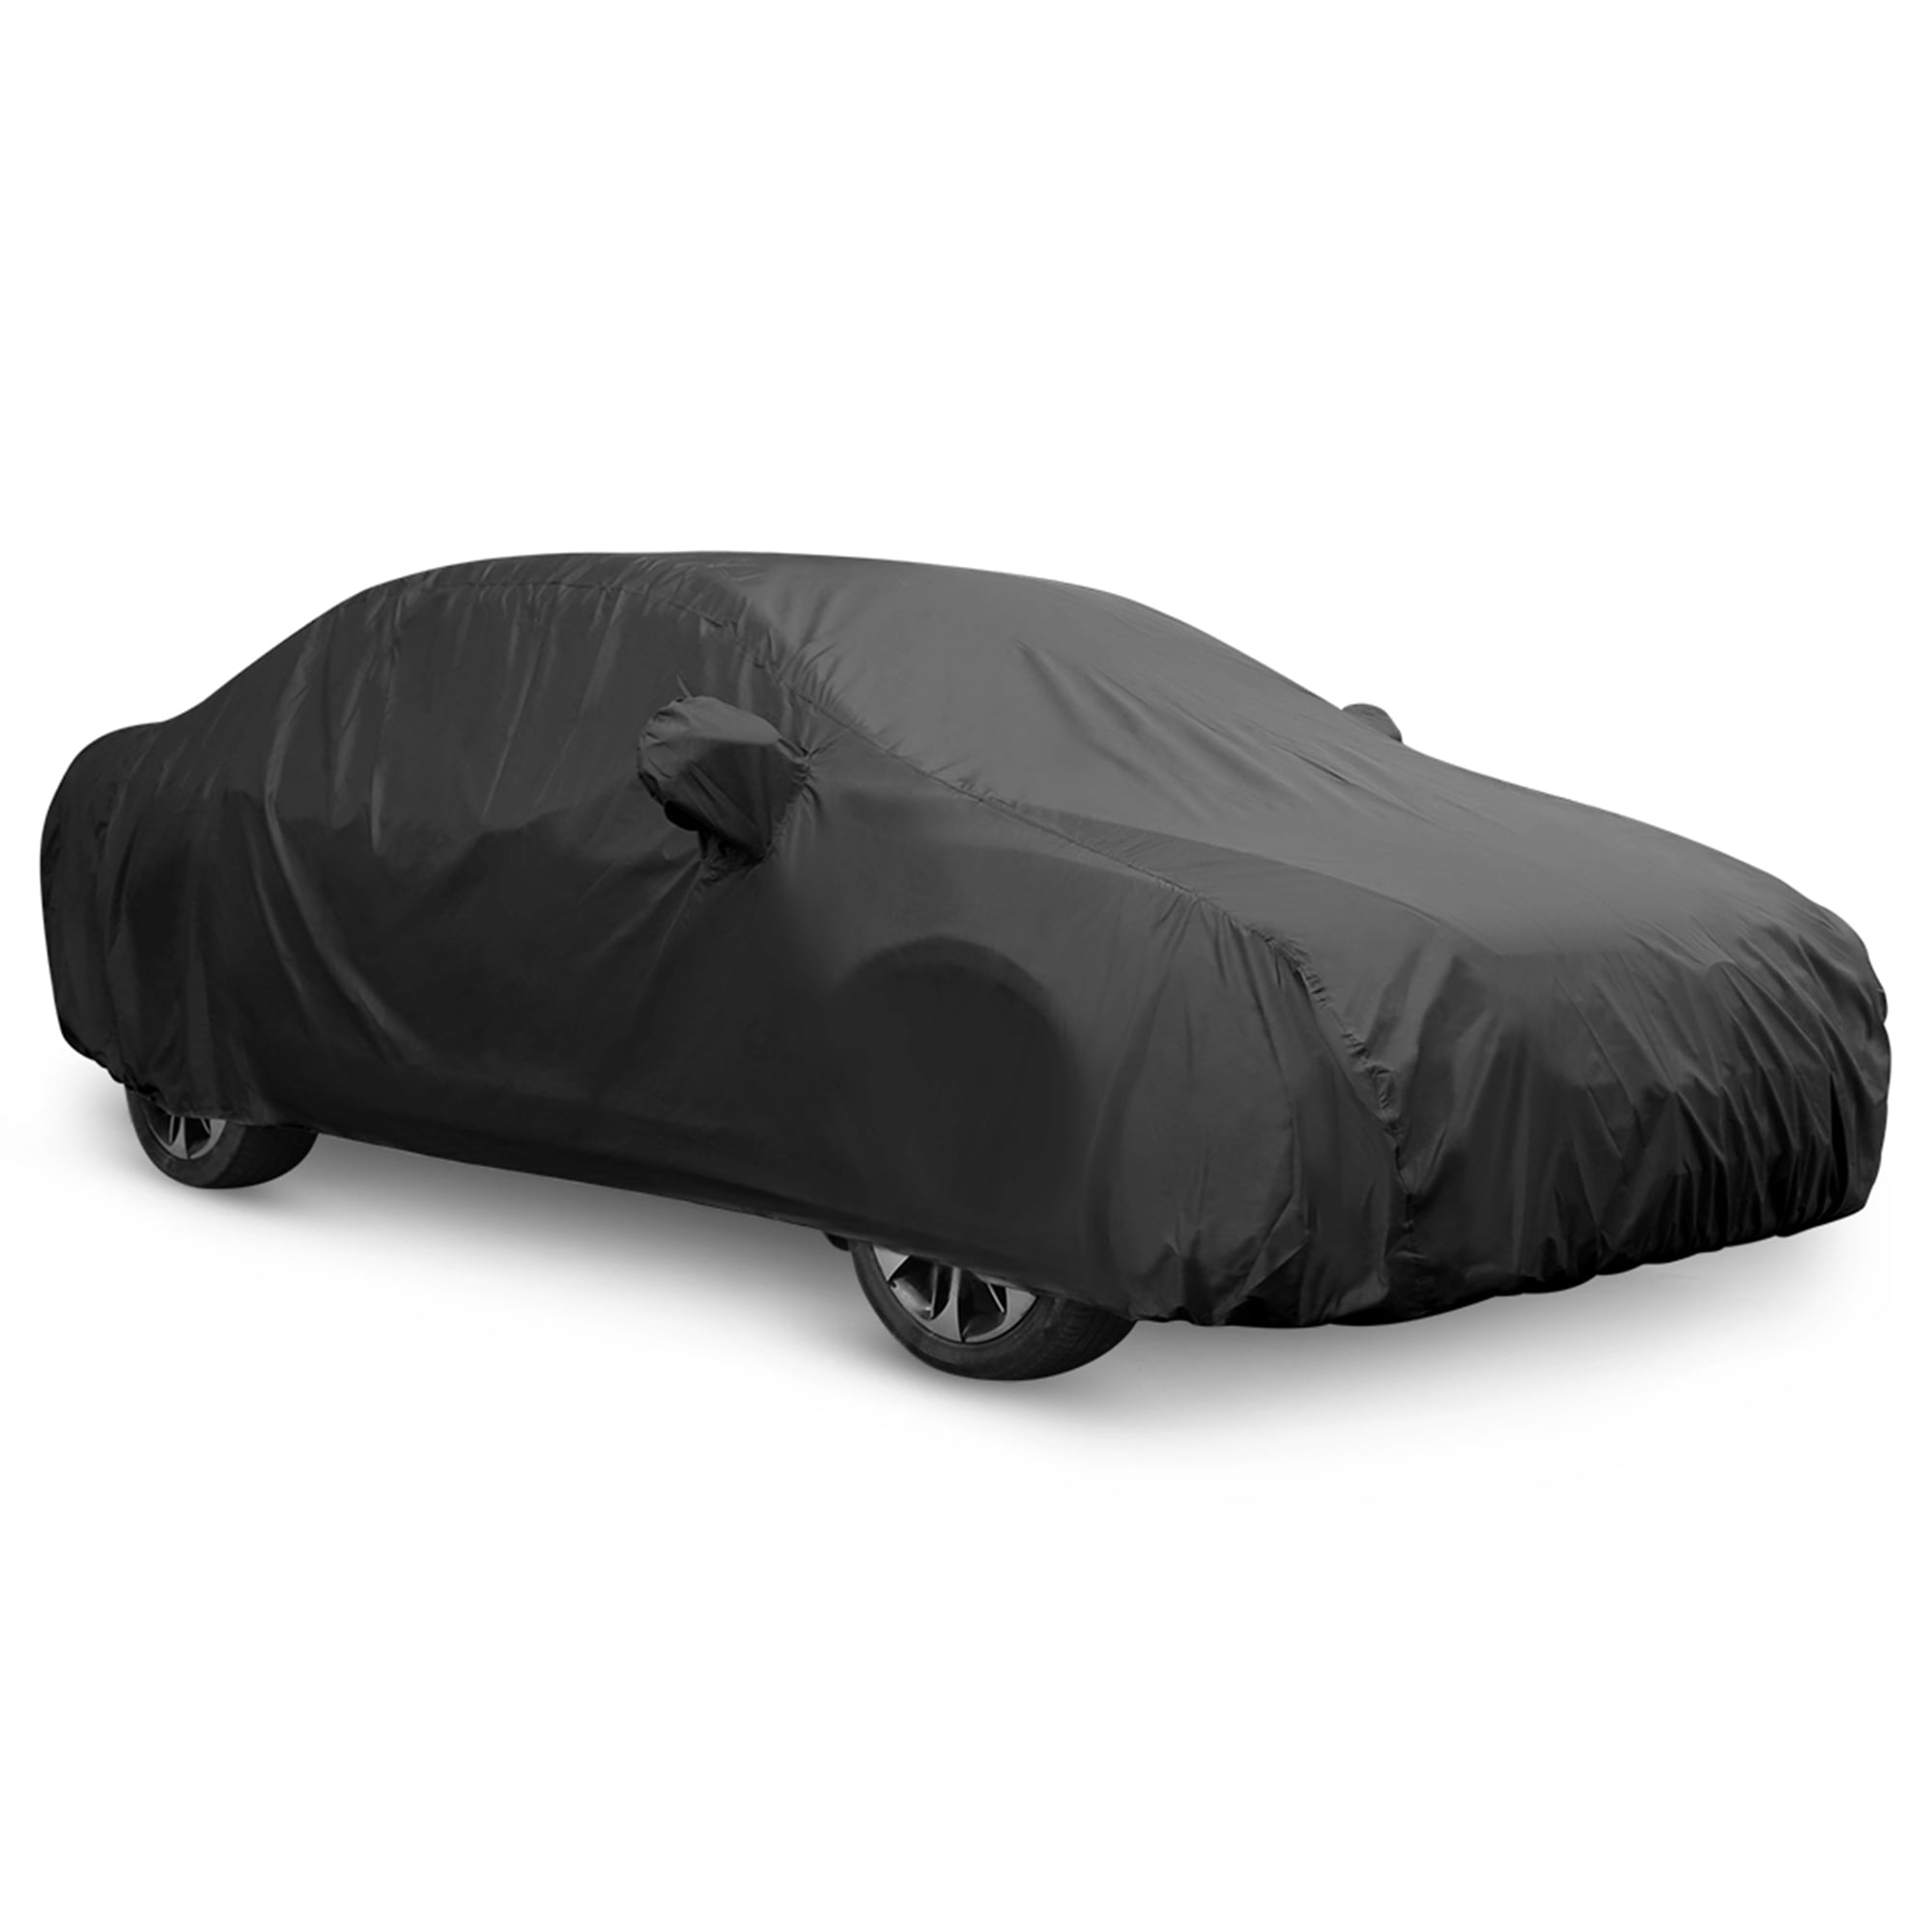 2014 2015 2016 2017 2018 2019 CHRYSLER TOWN & COUNTRY Breathable Car Cover 